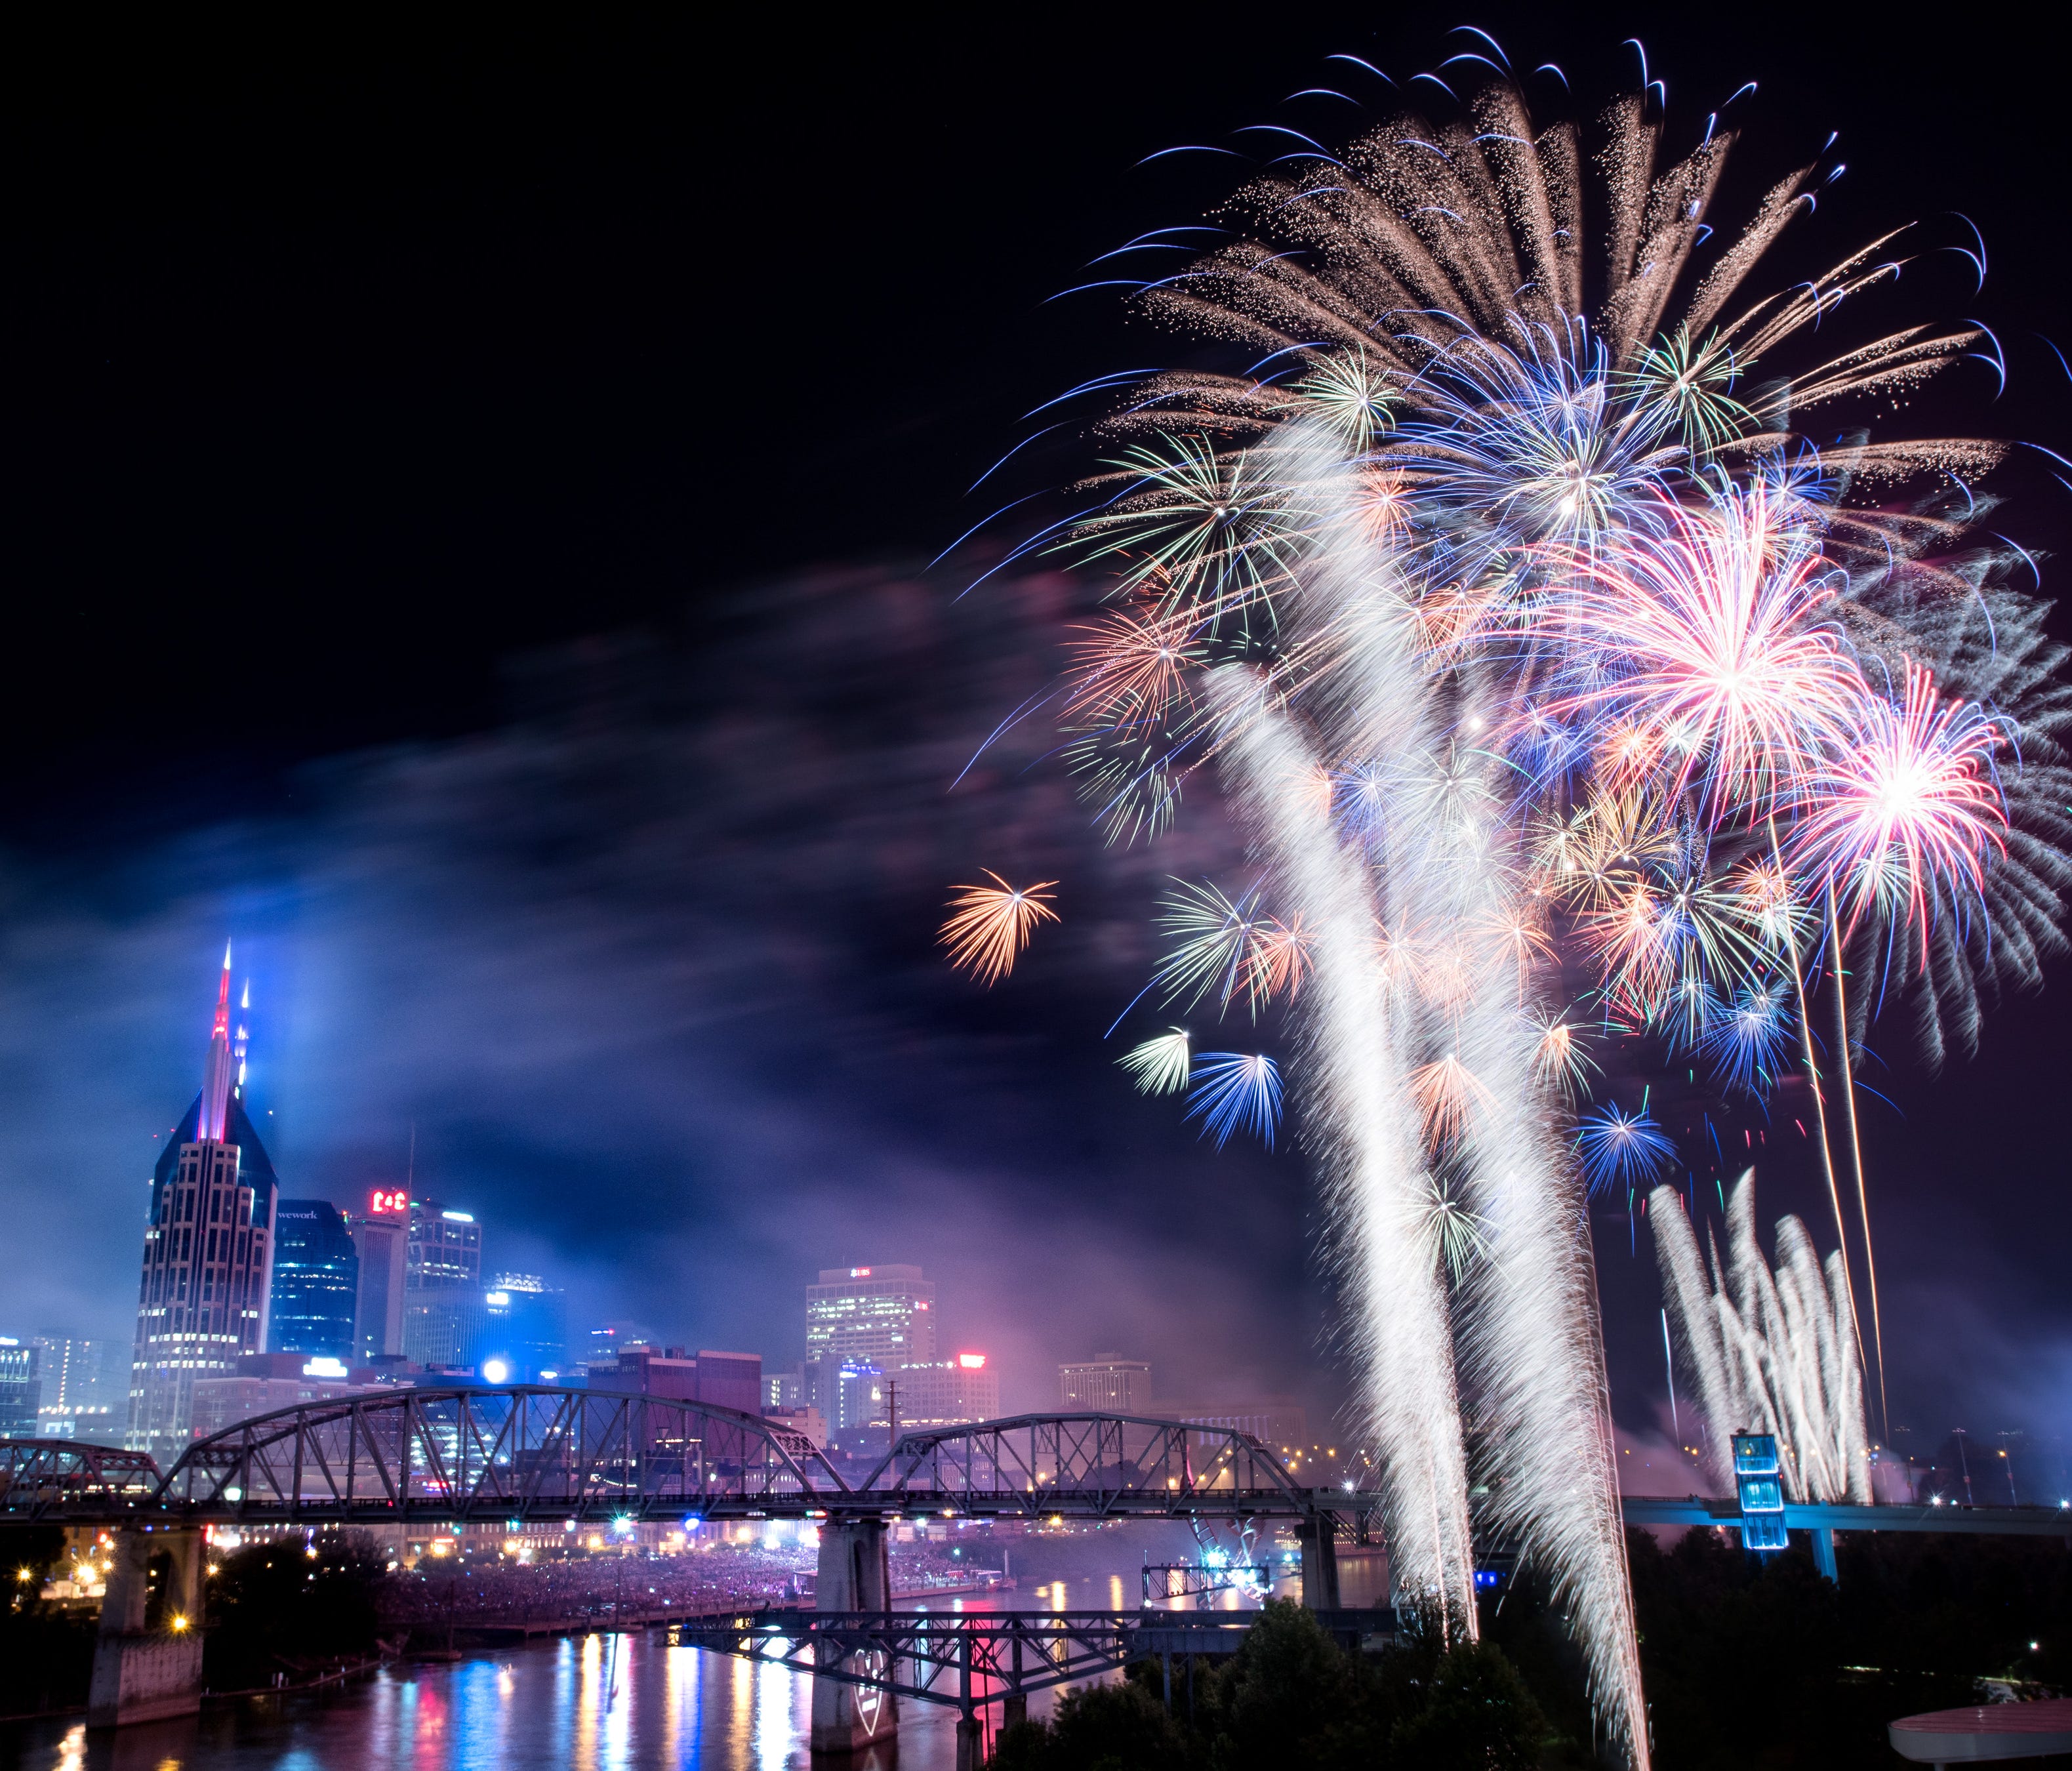 Fireworks illuminate the sky during the Let Freedom Sing! Music City July 4th event in Nashville, Tenn. on July 4, 2018.